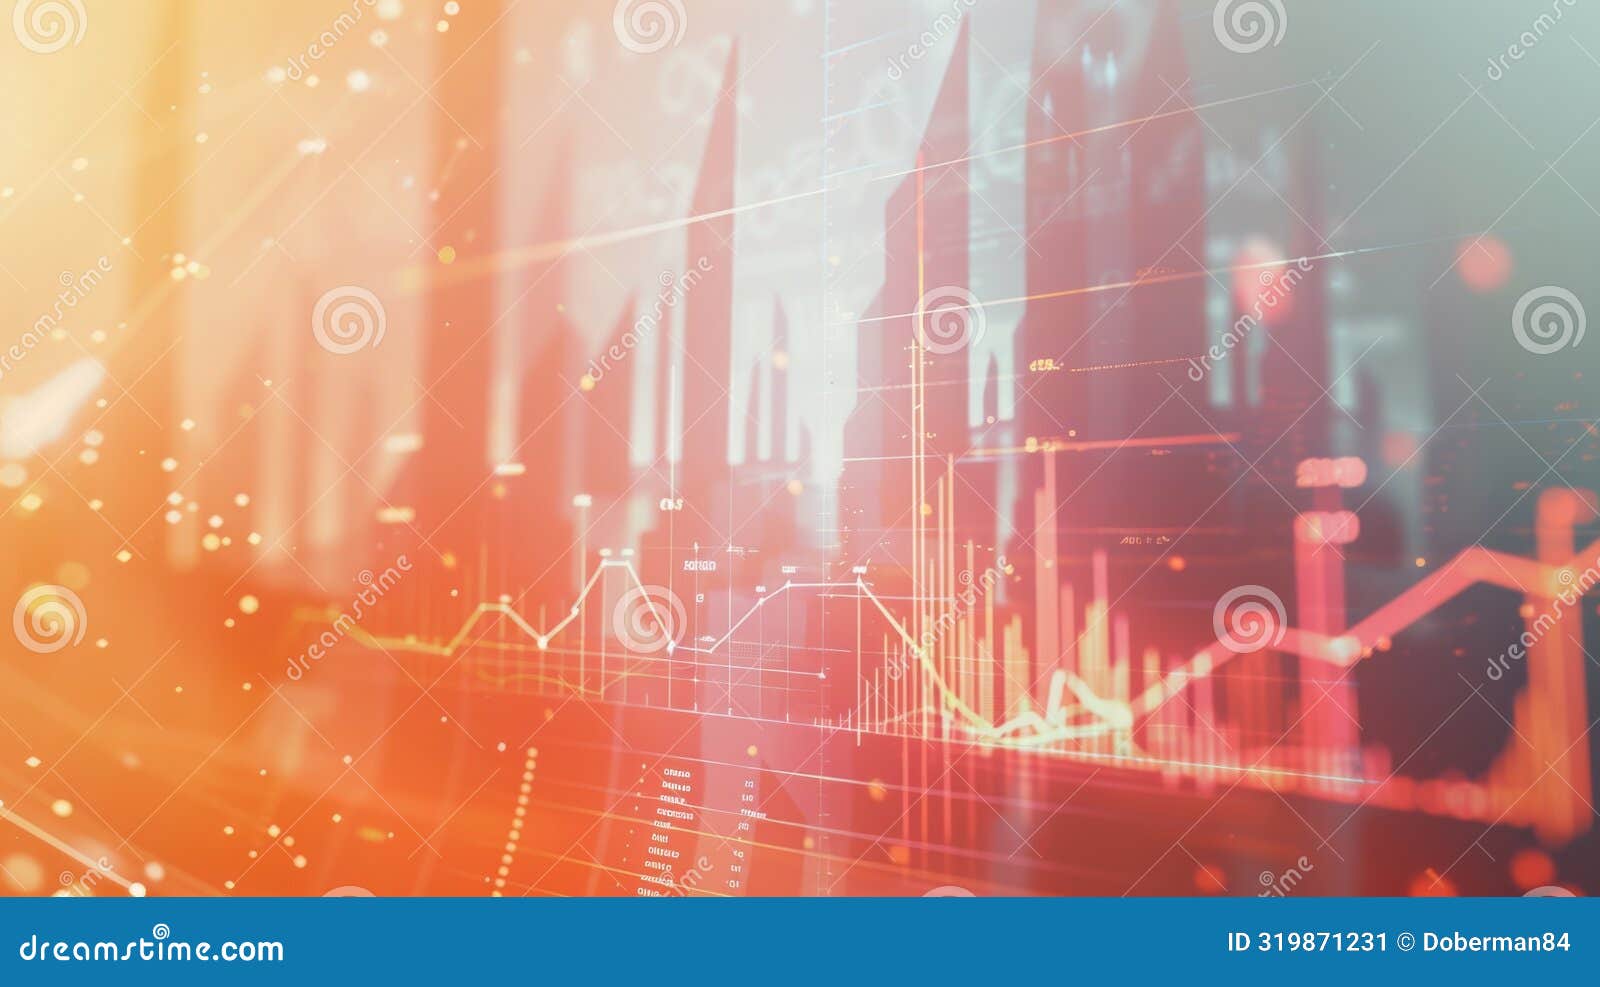 Abstract financial chart with vibrant cityscape background featuring data analysis and business metrics. An abstract financial chart overlayed on a vibrant cityscape background. This image represents data analysis, business metrics, and economic trends, perfect for financial reports, presentations, or illustrating market concepts. AI generated